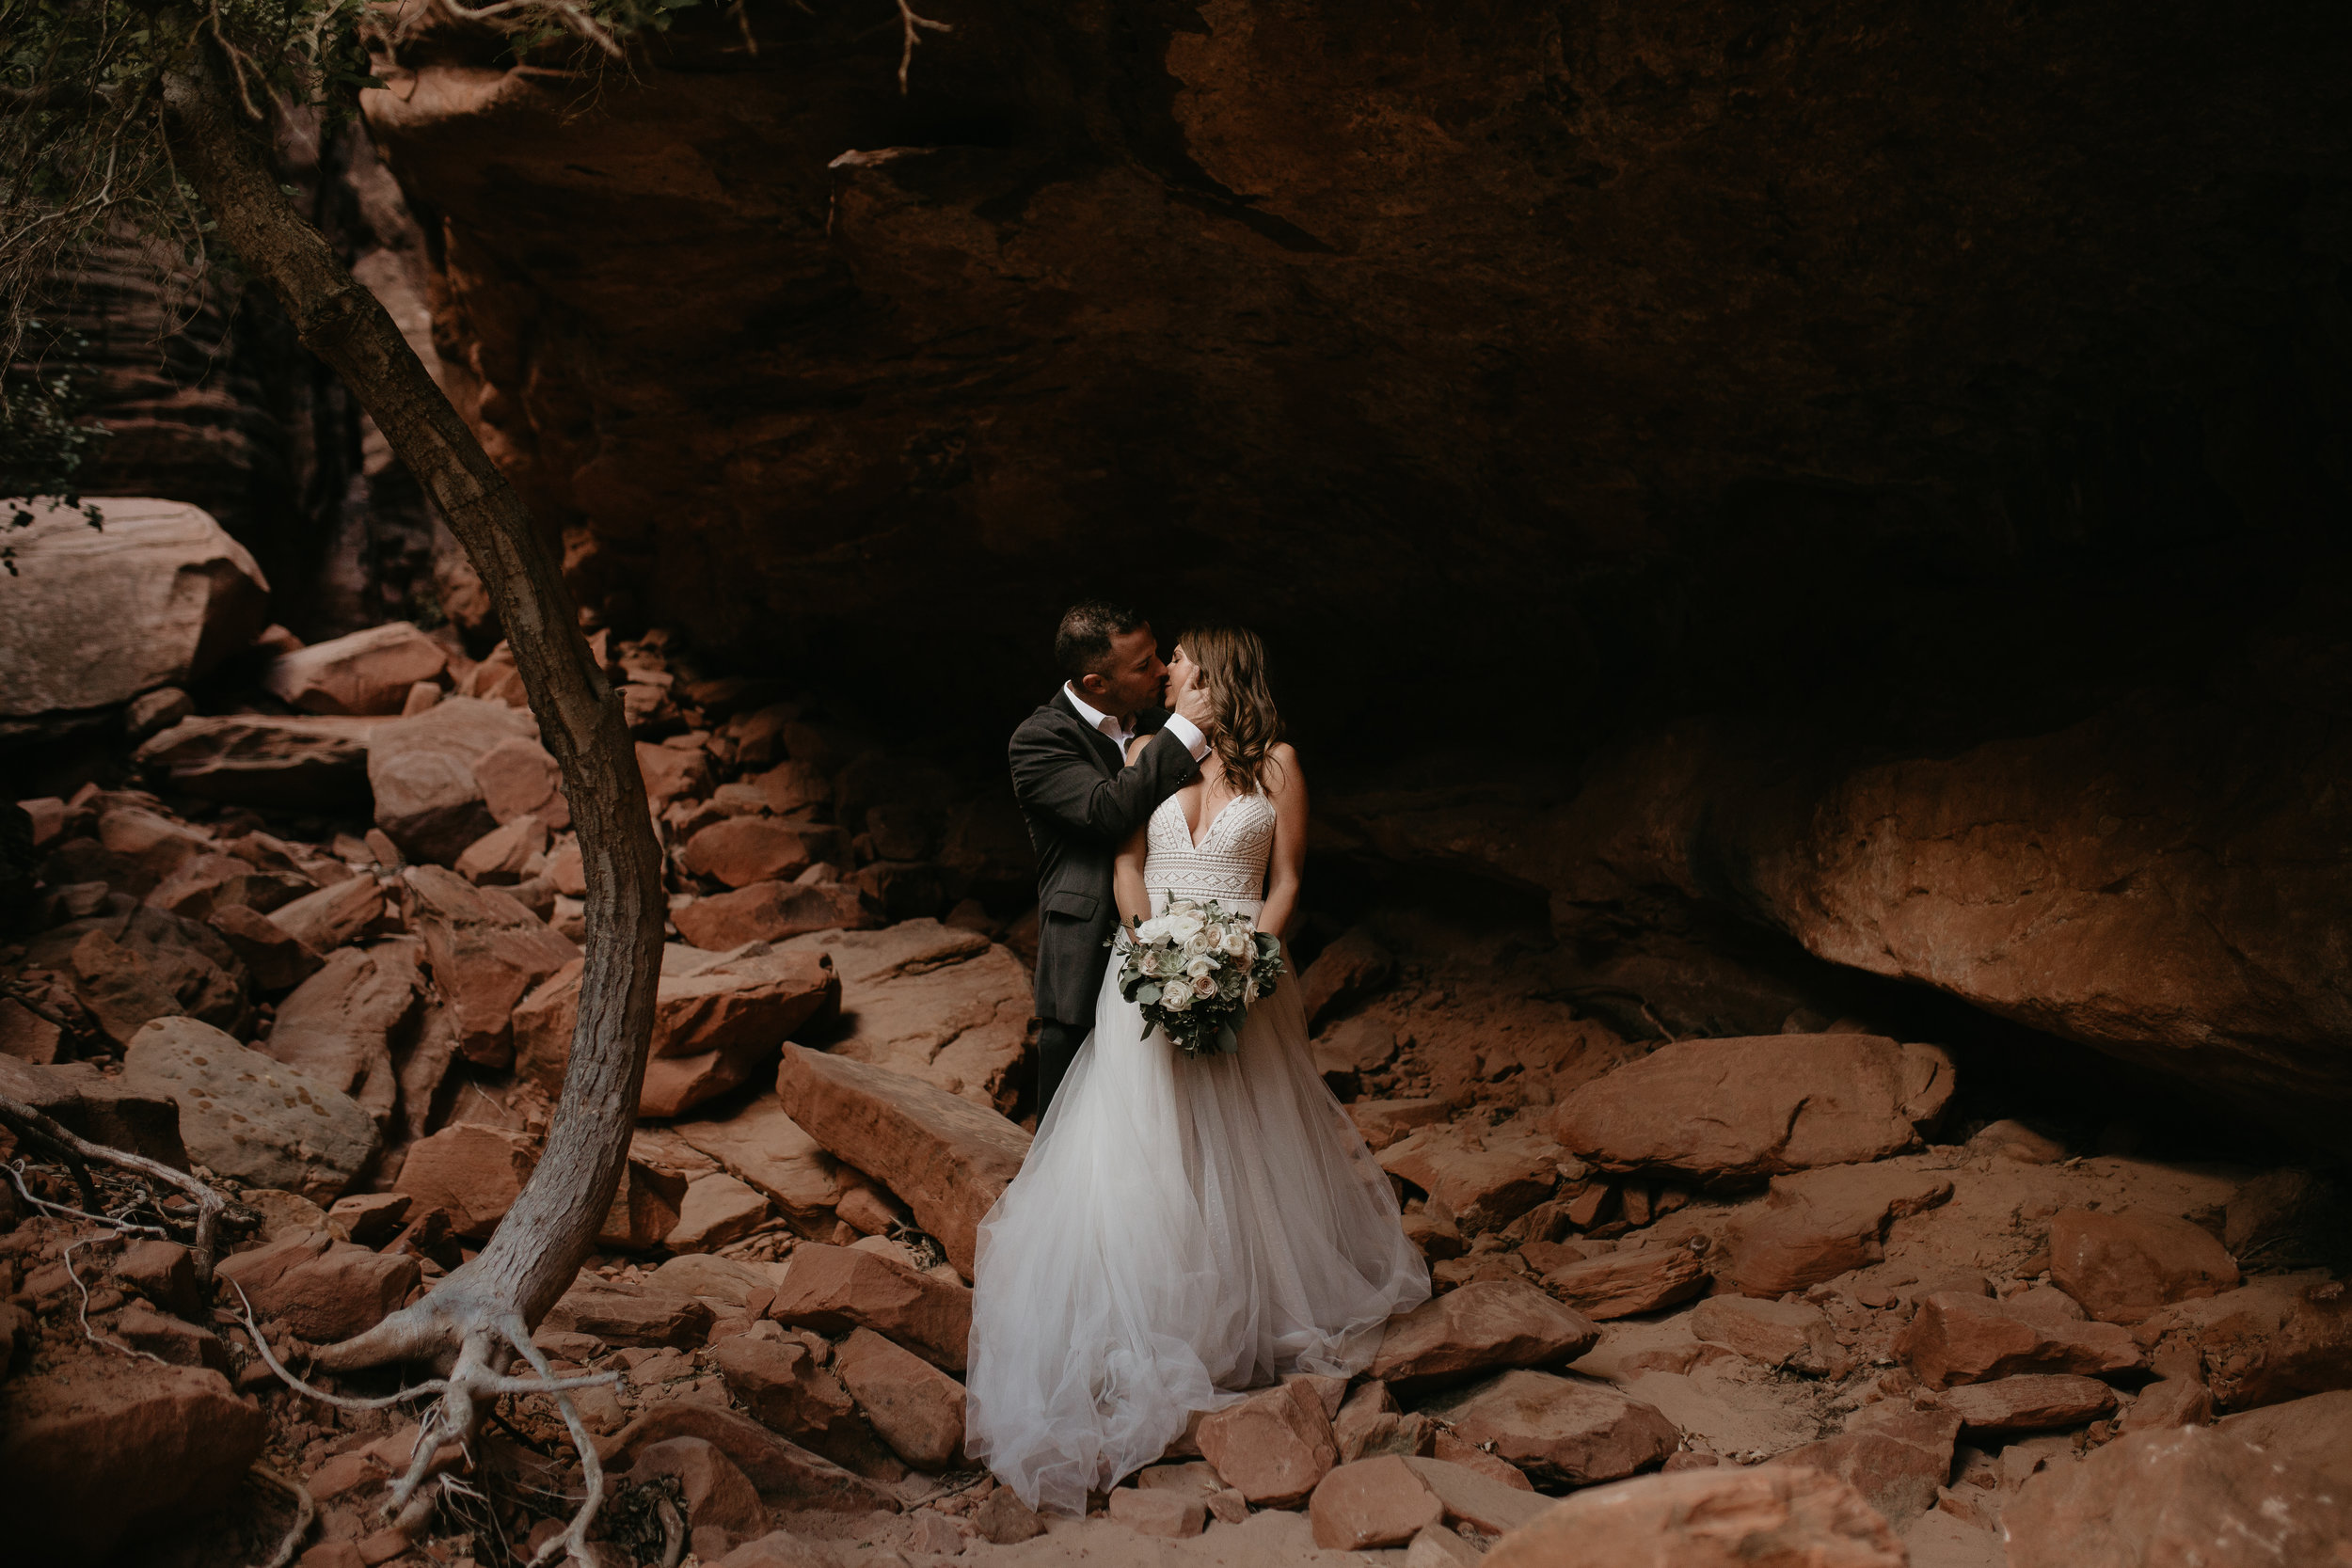 nicole-daacke-photography-zion-national-park-elopement-photographer-canyon-overlook-trail-elope-hiking-adventure-wedding-photos-fall-utah-red-rock-canyon-stgeorge-eloping-photographer-29.jpg